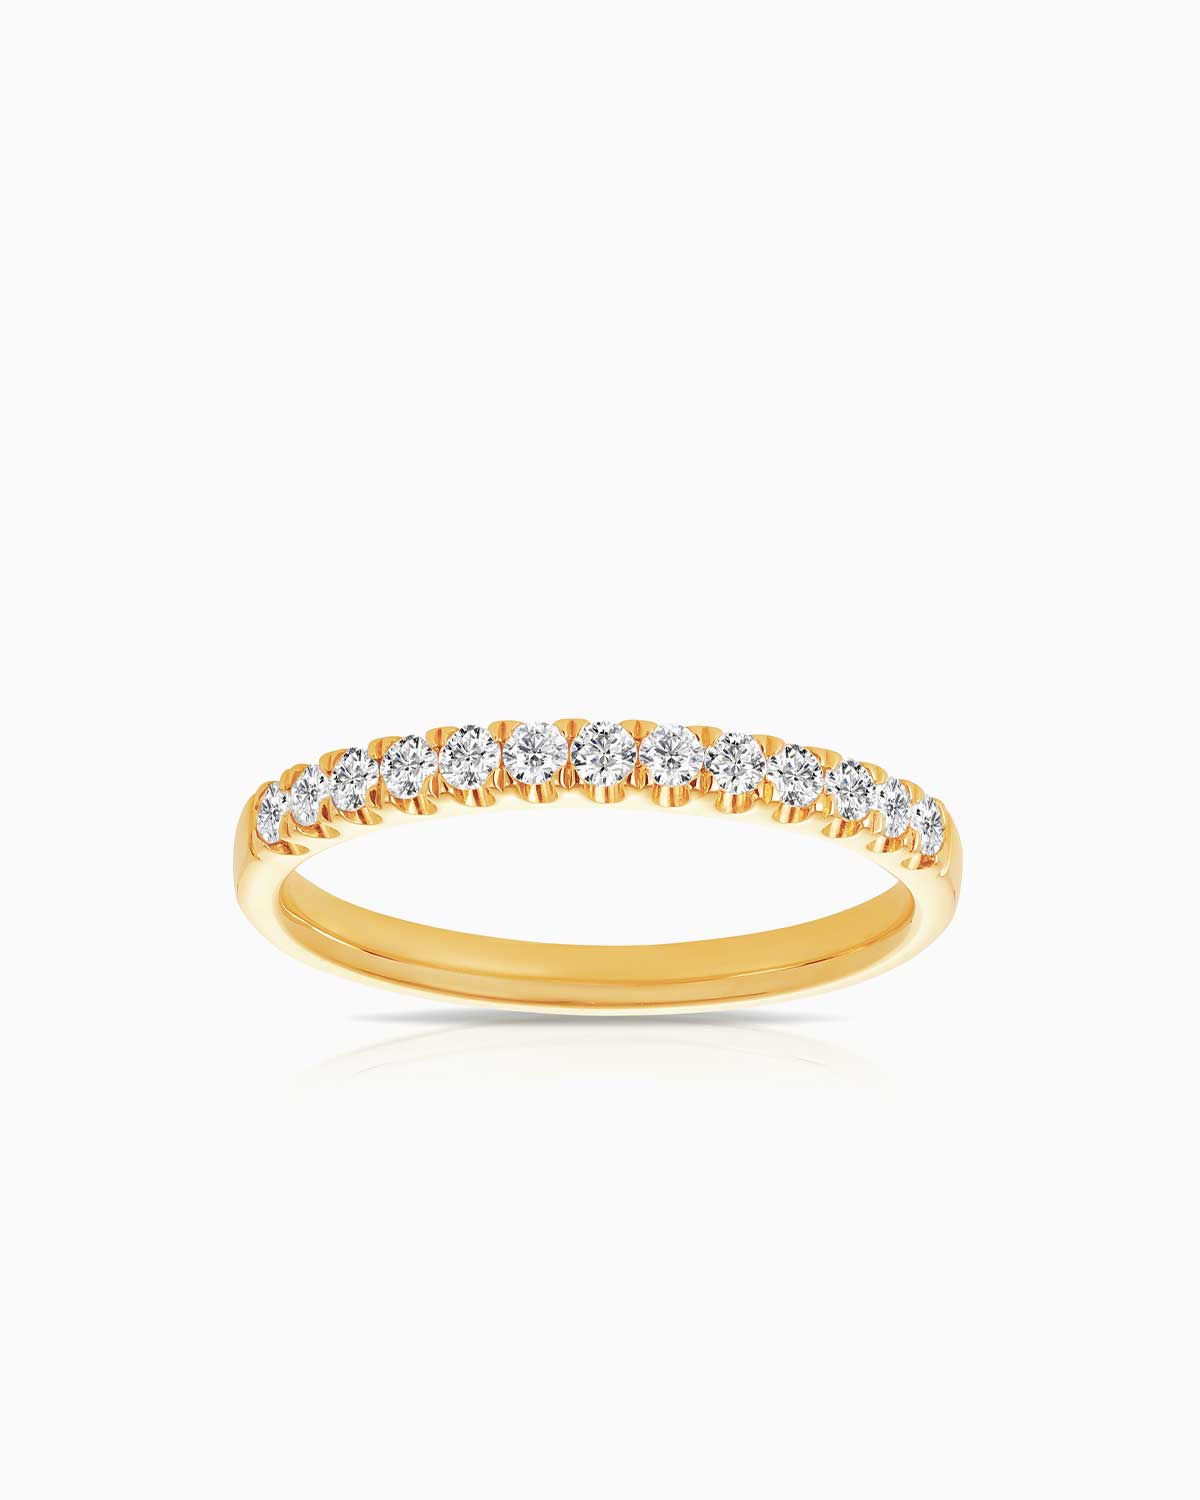 18 karat yellow gold and diamond half round Demi ring by claude and me jewellery